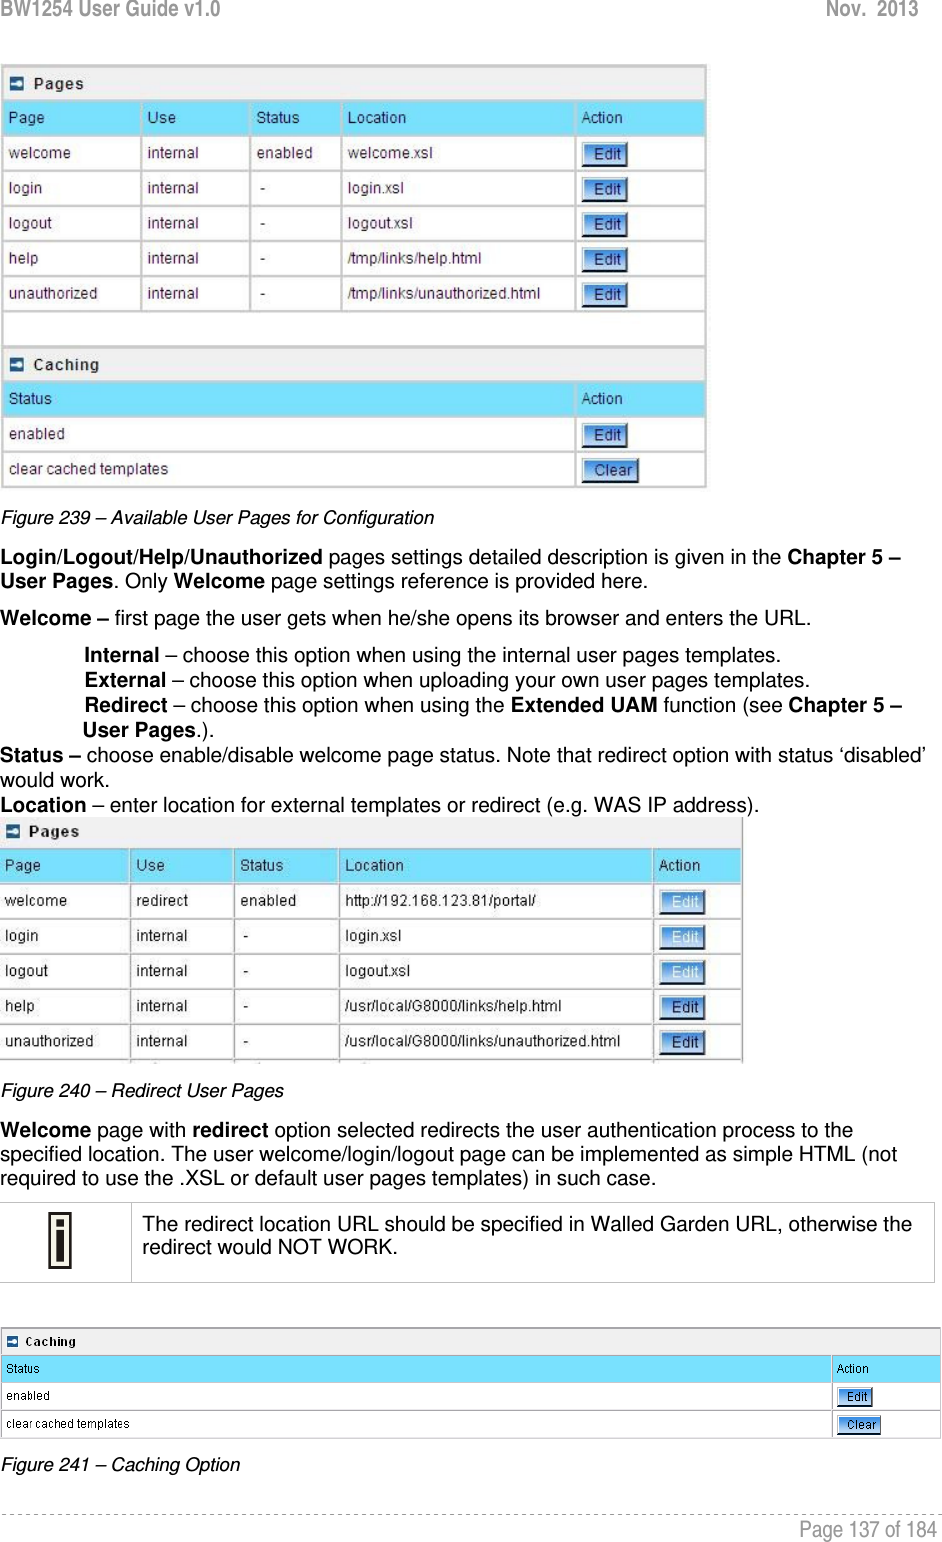 BW1254 User Guide v1.0  Nov.  2013     Page 137 of 184    Figure 239 – Available User Pages for Configuration Login/Logout/Help/Unauthorized pages settings detailed description is given in the Chapter 5 – User Pages. Only Welcome page settings reference is provided here. Welcome – first page the user gets when he/she opens its browser and enters the URL. Internal – choose this option when using the internal user pages templates. External – choose this option when uploading your own user pages templates. Redirect – choose this option when using the Extended UAM function (see Chapter 5 – User Pages.). Status – choose enable/disable welcome page status. Note that redirect option with status ‘disabled’ would work. Location – enter location for external templates or redirect (e.g. WAS IP address).  Figure 240 – Redirect User Pages  Welcome page with redirect option selected redirects the user authentication process to the specified location. The user welcome/login/logout page can be implemented as simple HTML (not required to use the .XSL or default user pages templates) in such case.  The redirect location URL should be specified in Walled Garden URL, otherwise the redirect would NOT WORK.   Figure 241 – Caching Option 